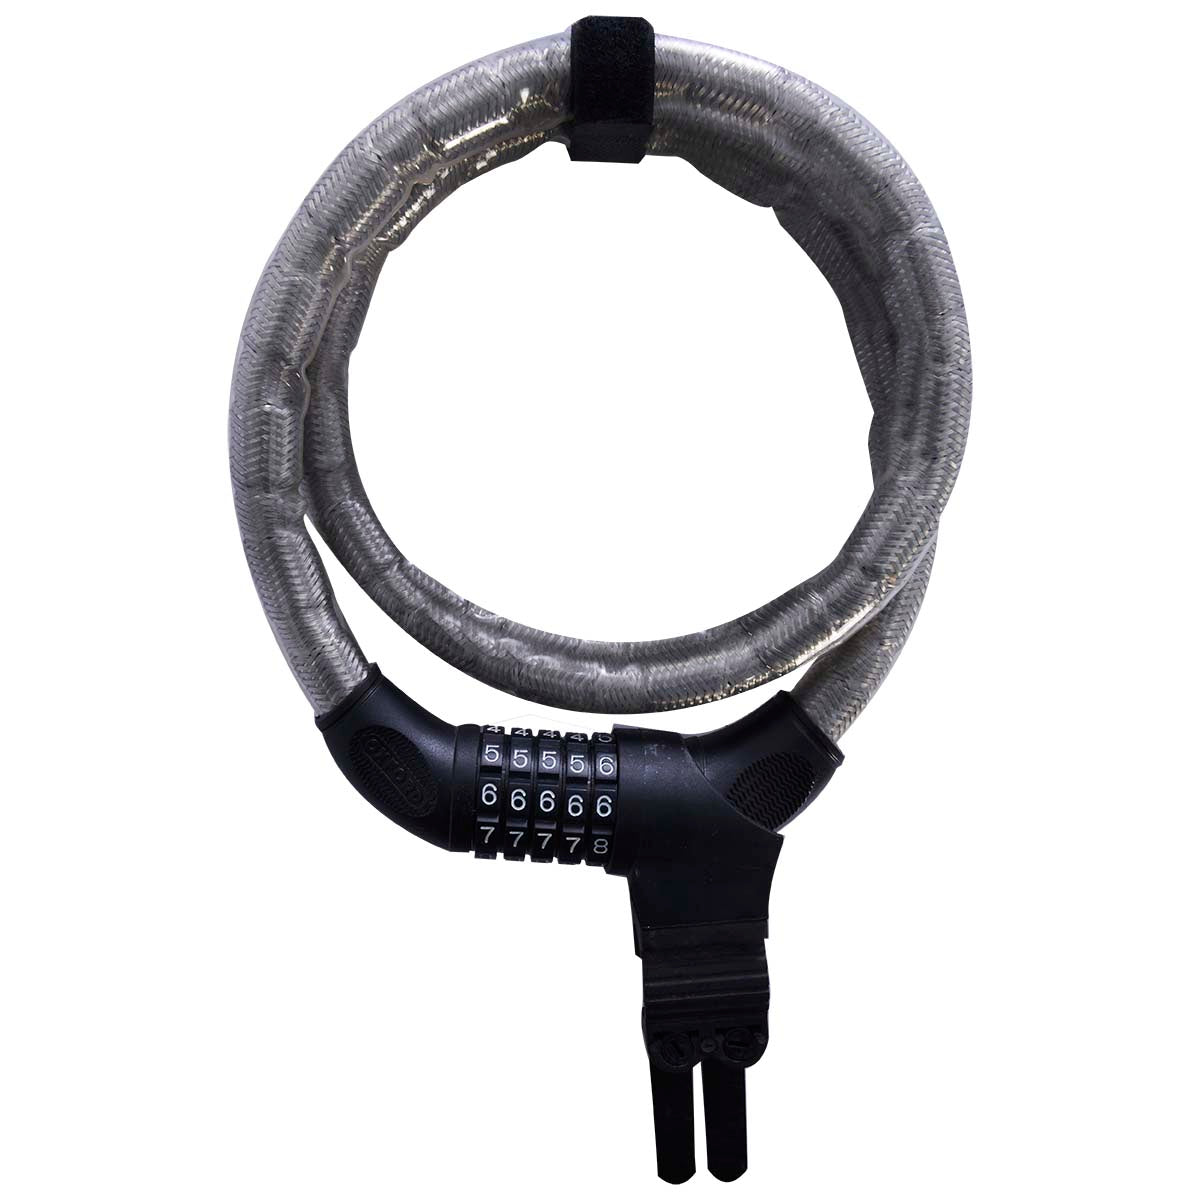 SAS Combi 22mm Thick Security Braided Cable & Lock, 2.0 metres long